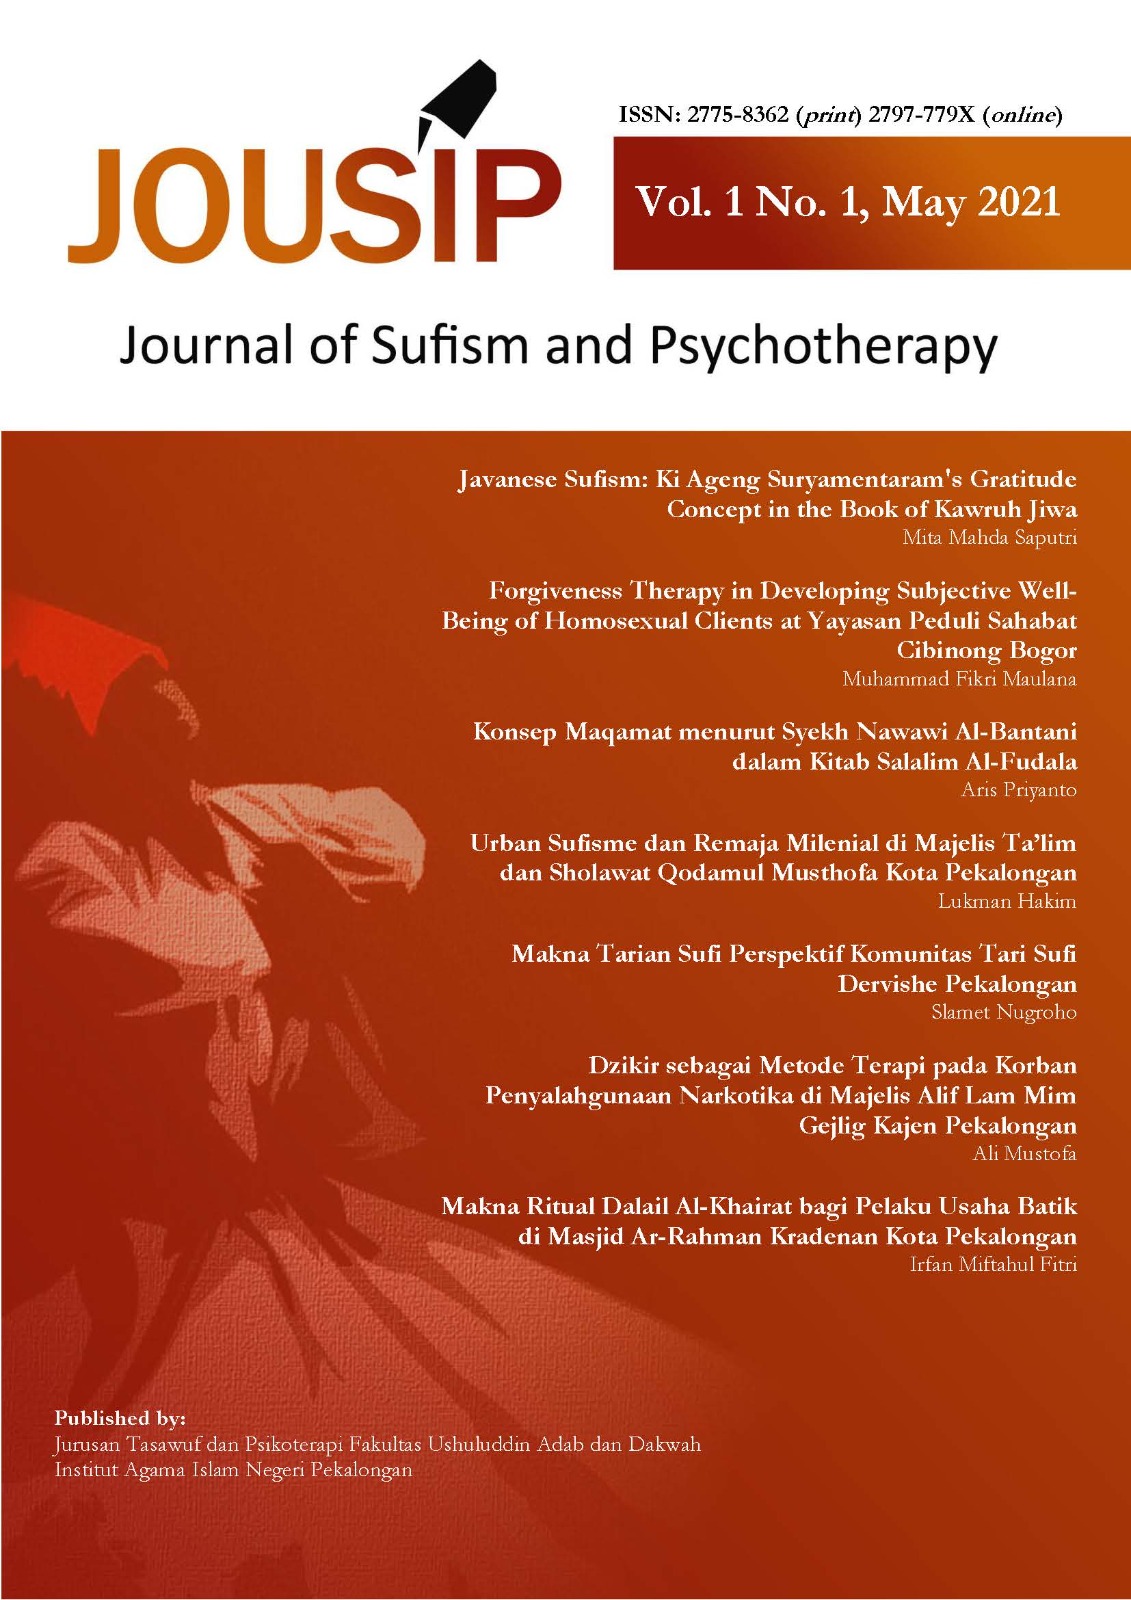 					View Vol. 1 No. 1 (2021): JOUSIP: Journal of Sufism and Psychotherapy, Vol. 1 No. 1, May 2021; Author Geographical: Indonesia, Brunei Darussalam
				